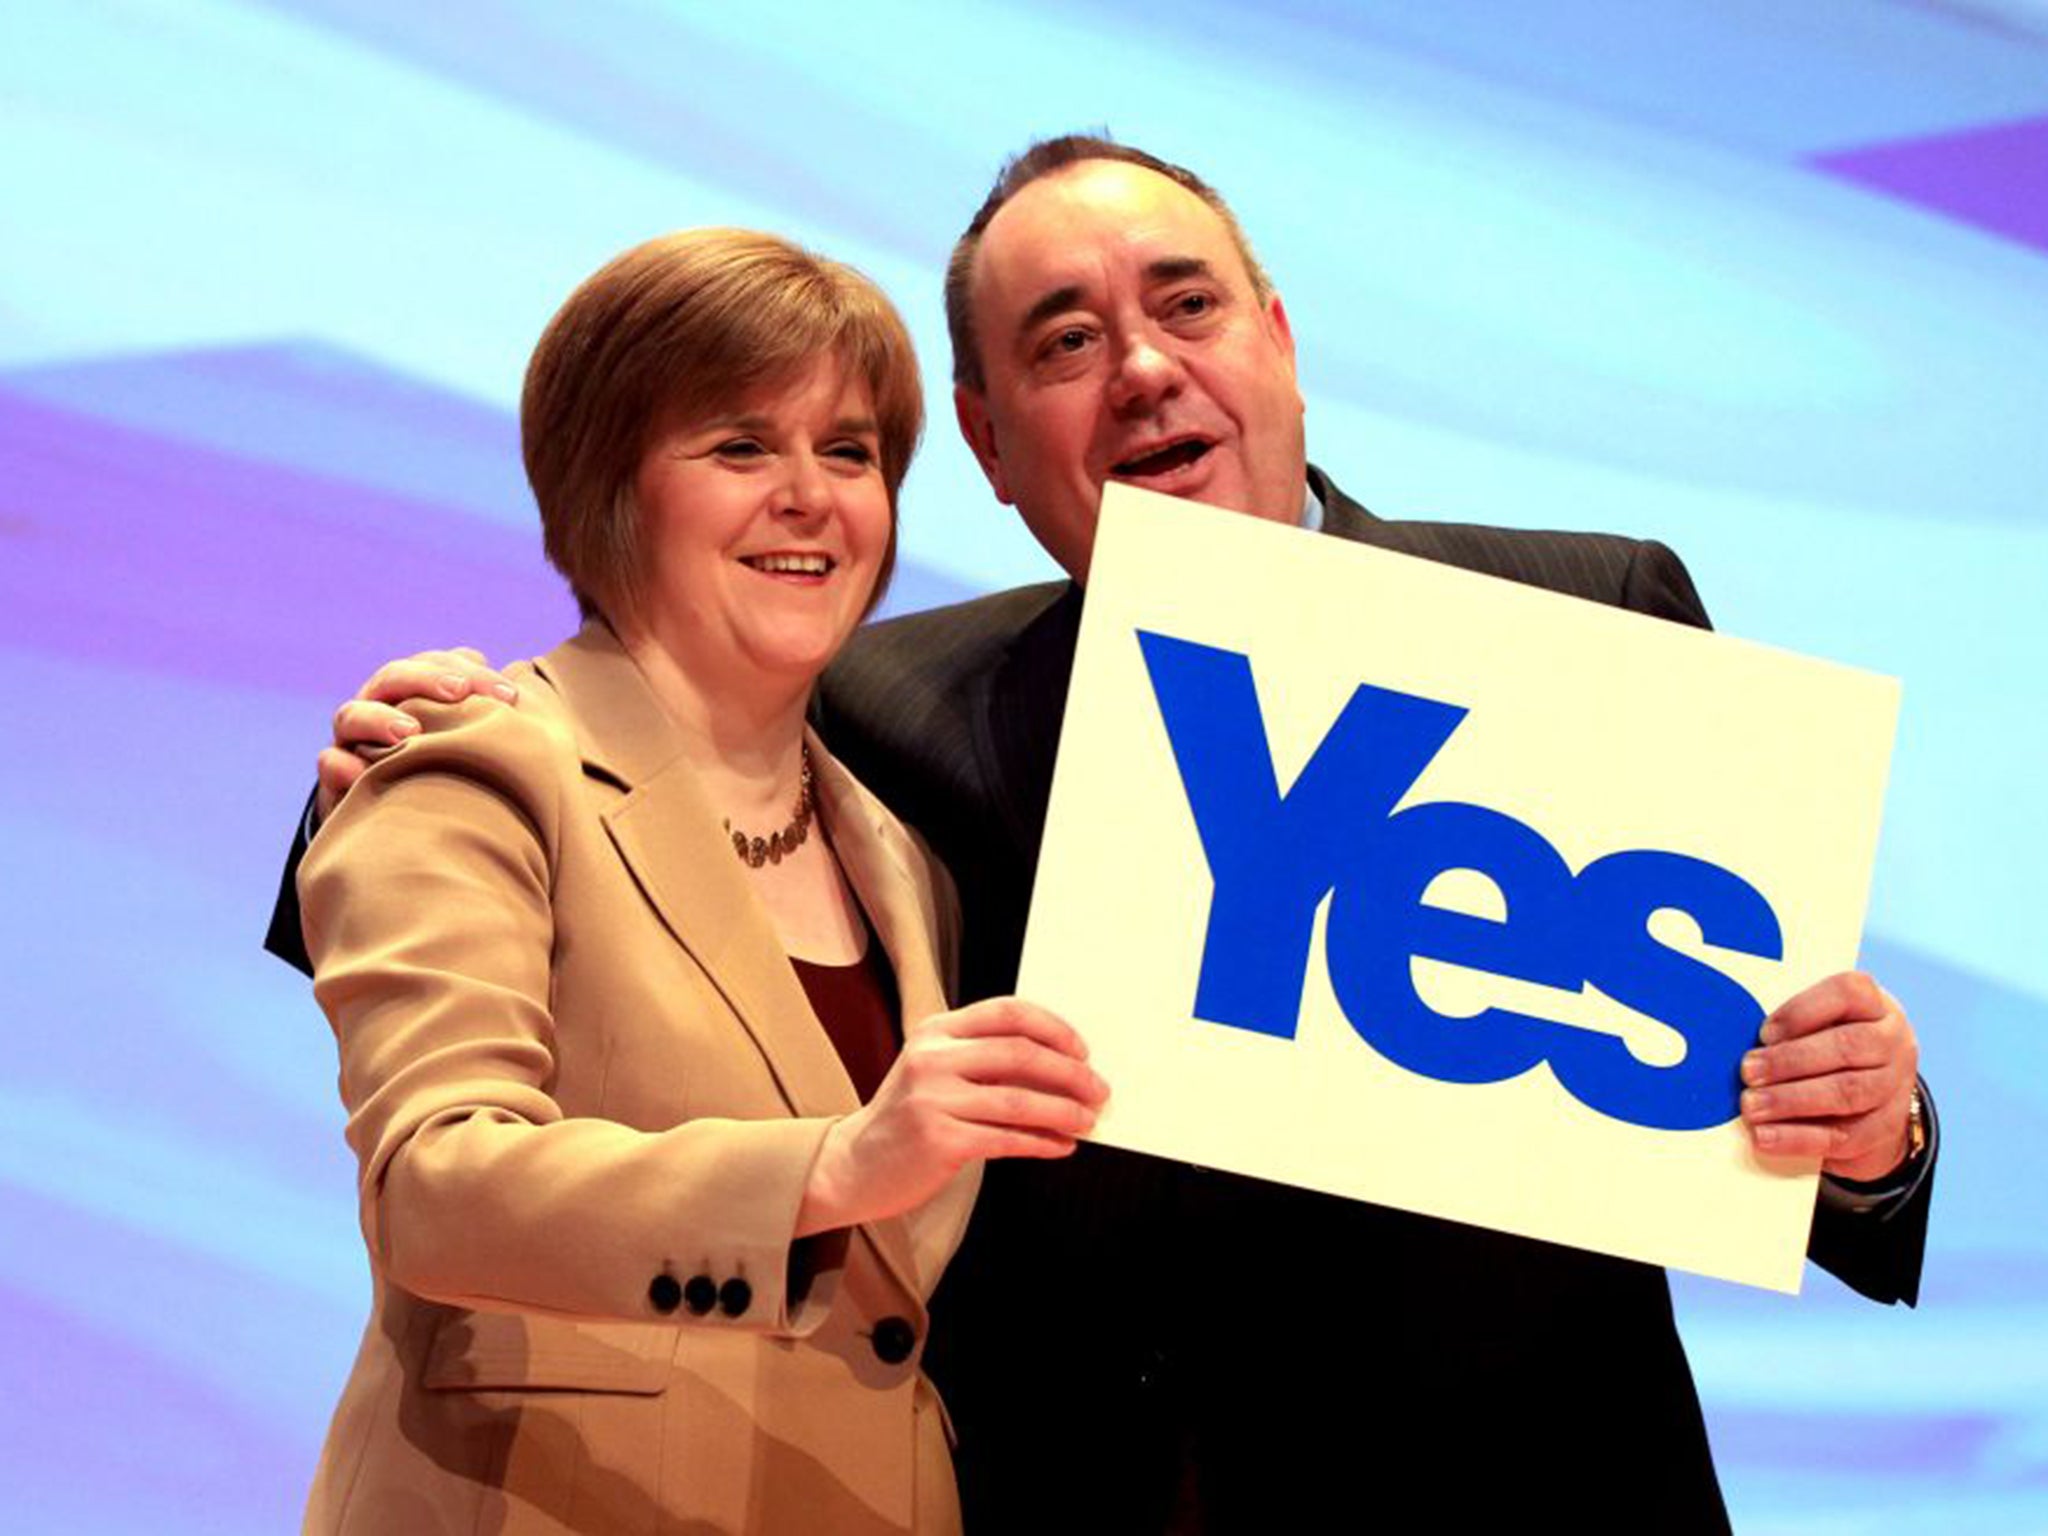 Nicola Sturgeon and Alex Salmond’s plan for fiscal independence was a key policy during the Scottish referendum campaign (Getty)